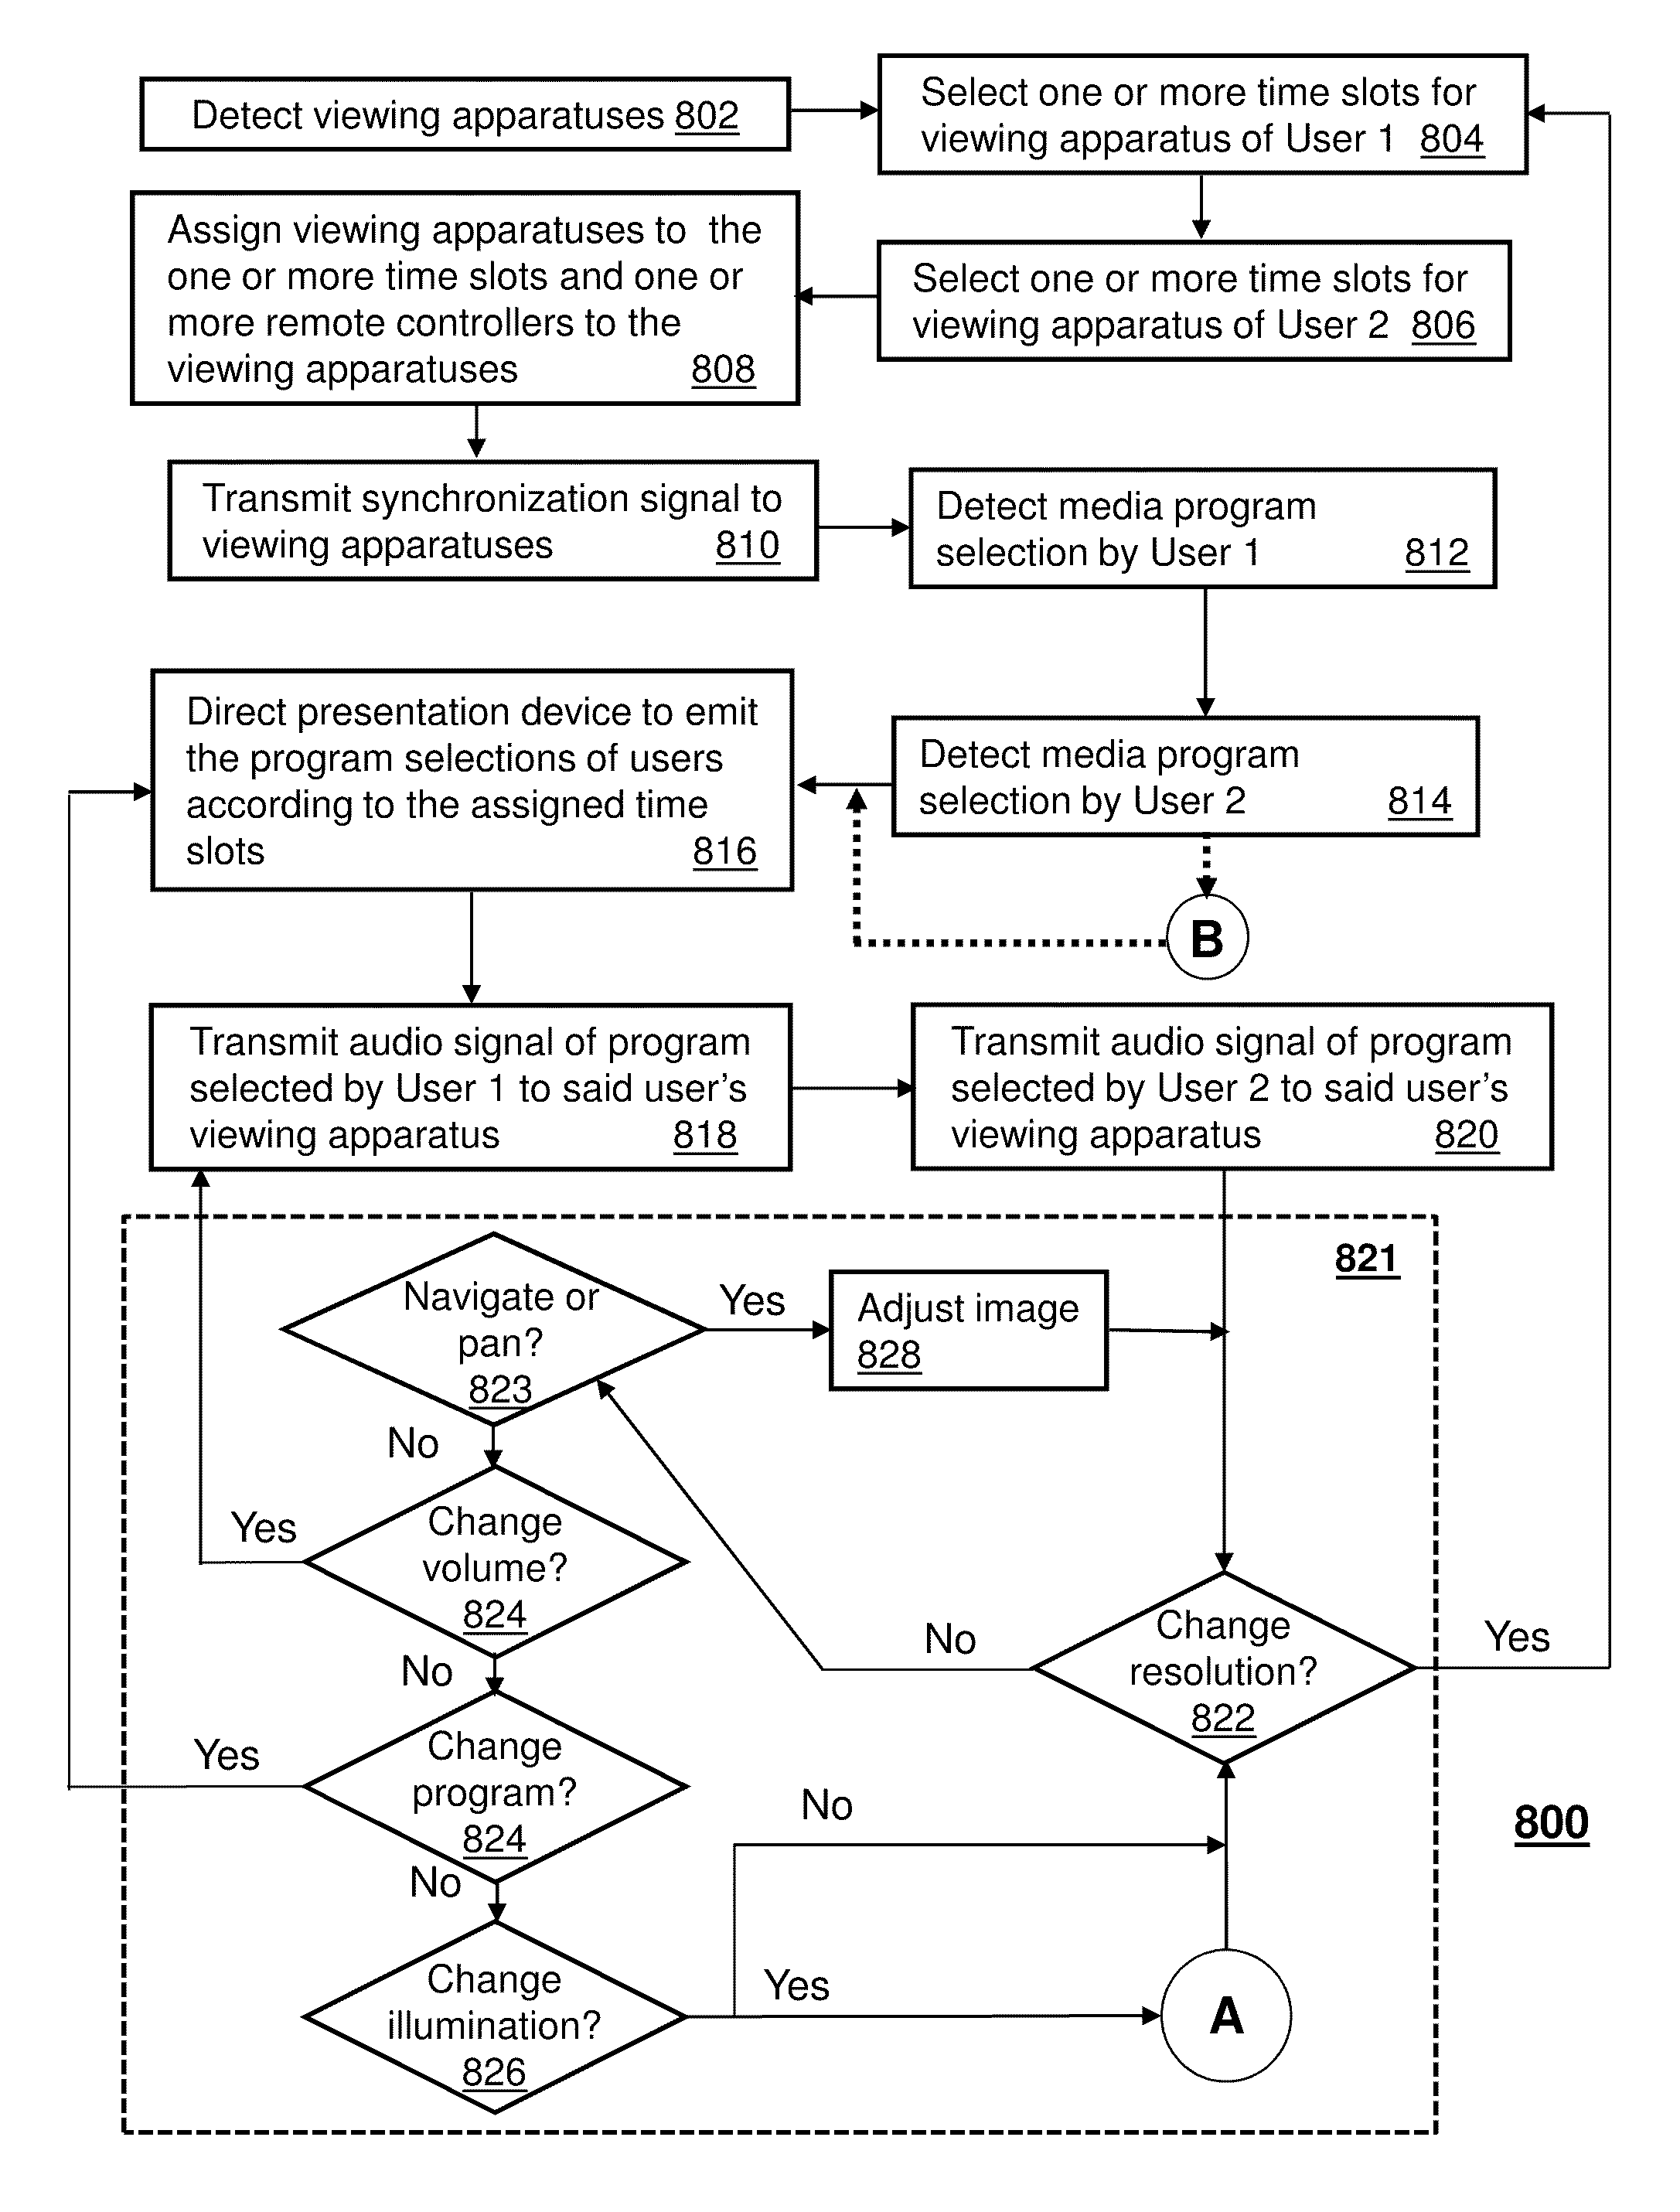 Method and apparatus for adapting a presentation of media content